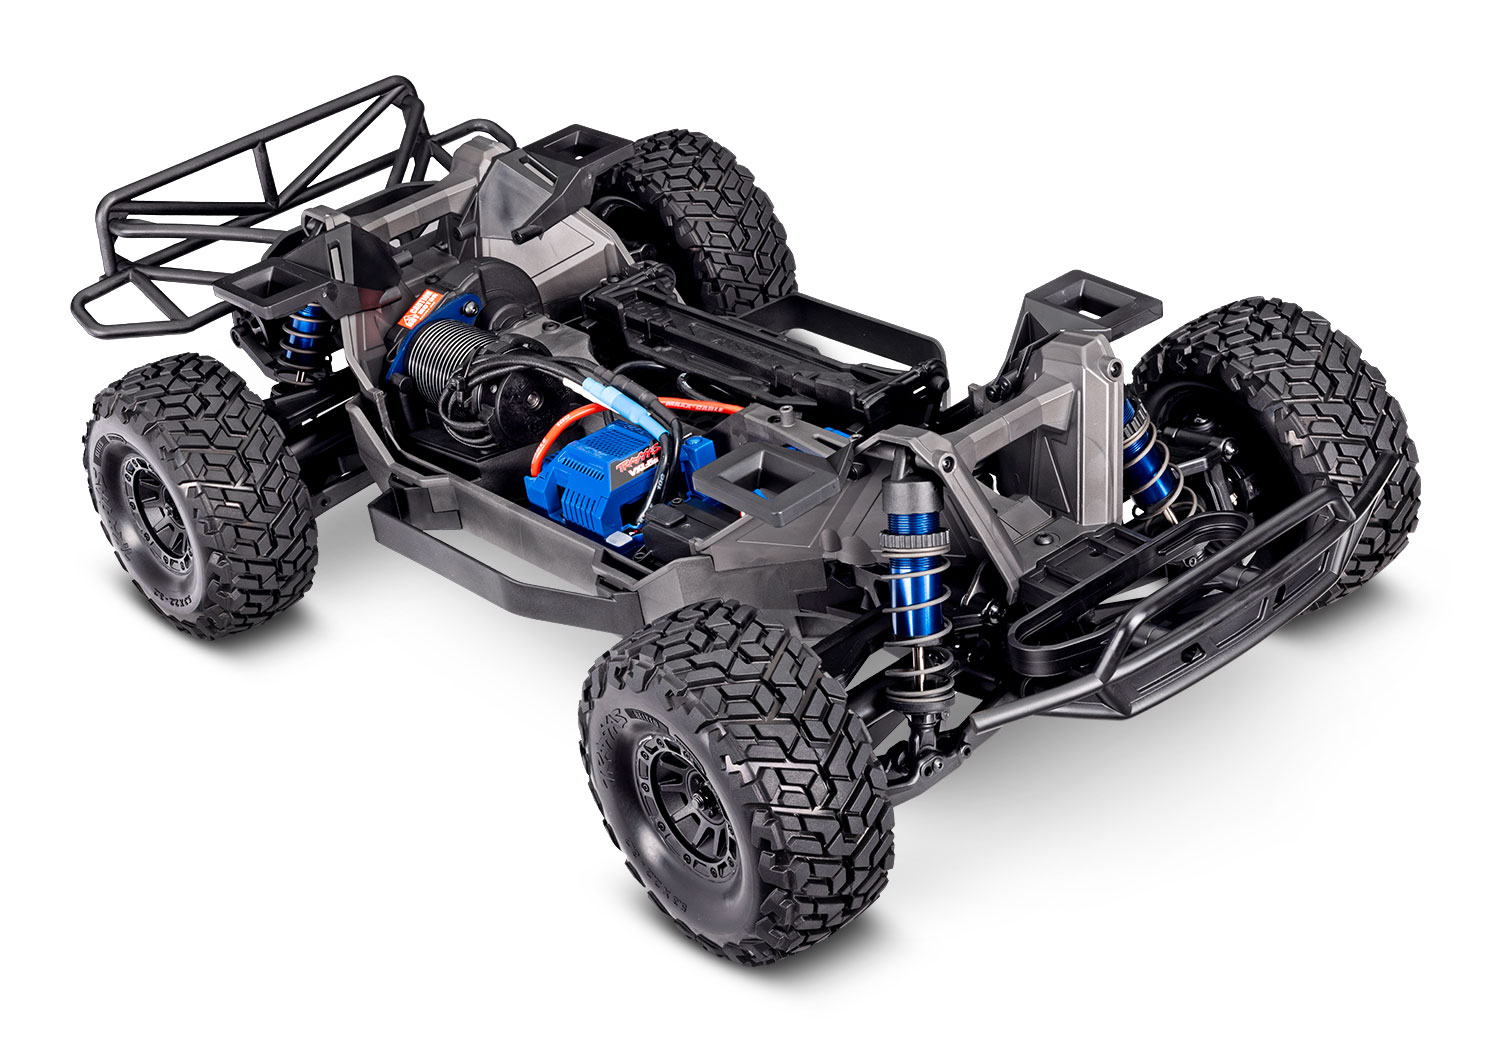 NOUVEAU PACK ECO 100% RTR MAXX SLASH ROCK N ROLL 4X4 BRUSHLESS LIPO 4S 6700 CHARGEUR TRAXXAS SAC OFFERT